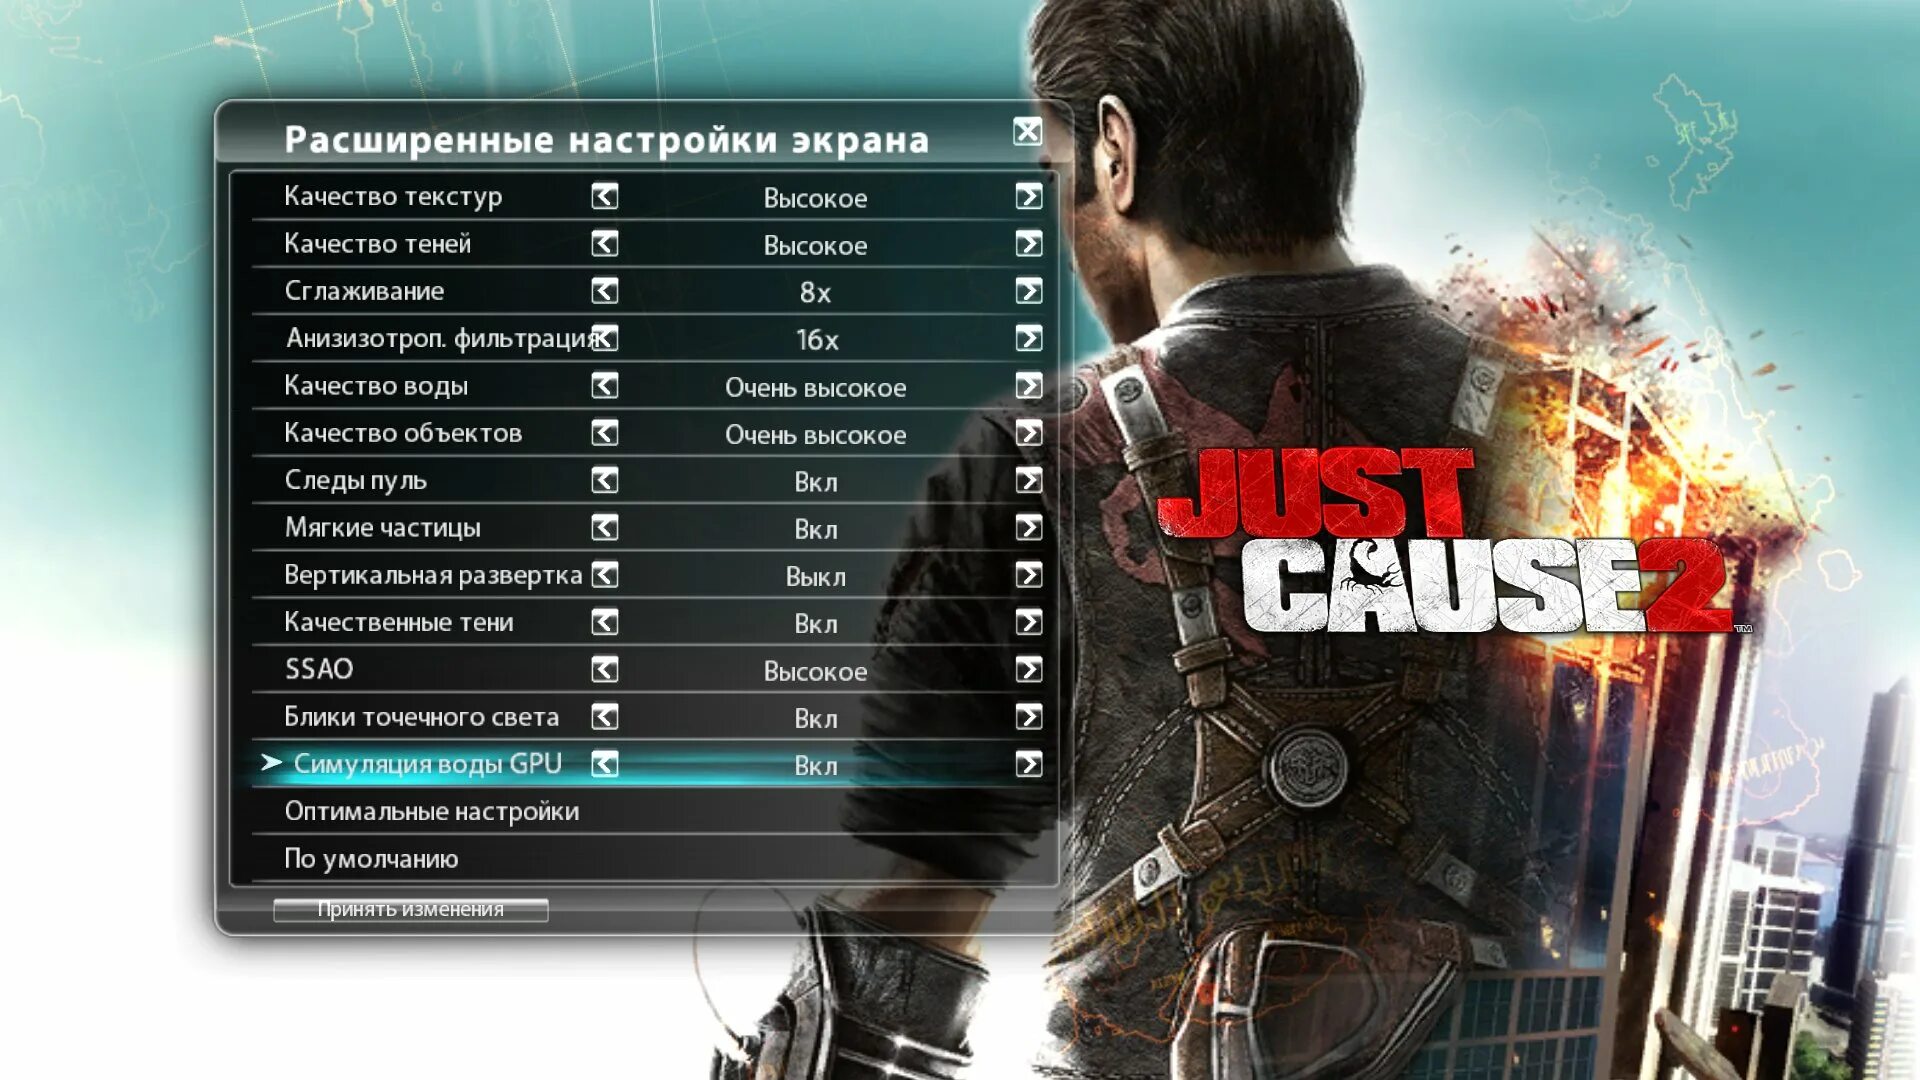 Gaming game id file. Just cause 2 на пс3. Just cause управление. Управление в игре just cause 2. Just cause 4 управление.